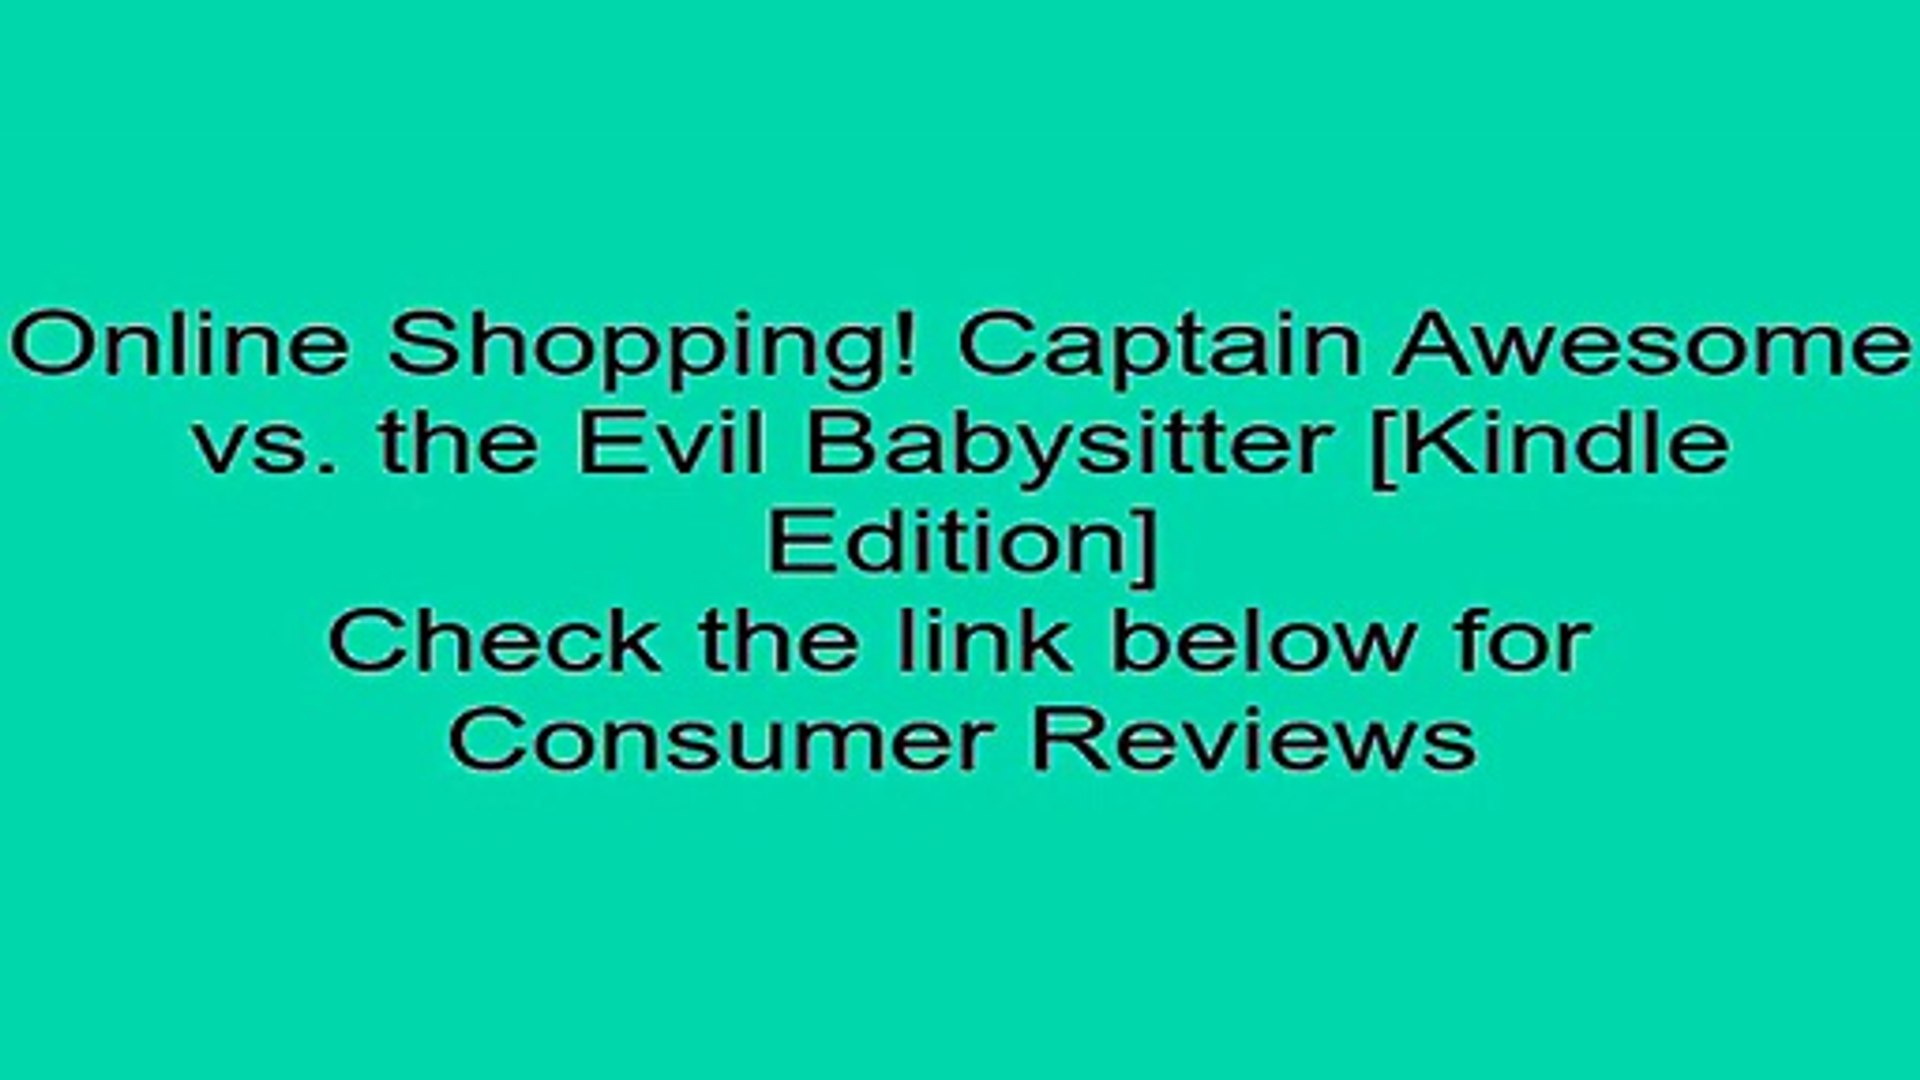 Download Captain Awesome Vs The Evil Babysitter Kindle Edition Review - escape the evil crazy babysitter in roblox